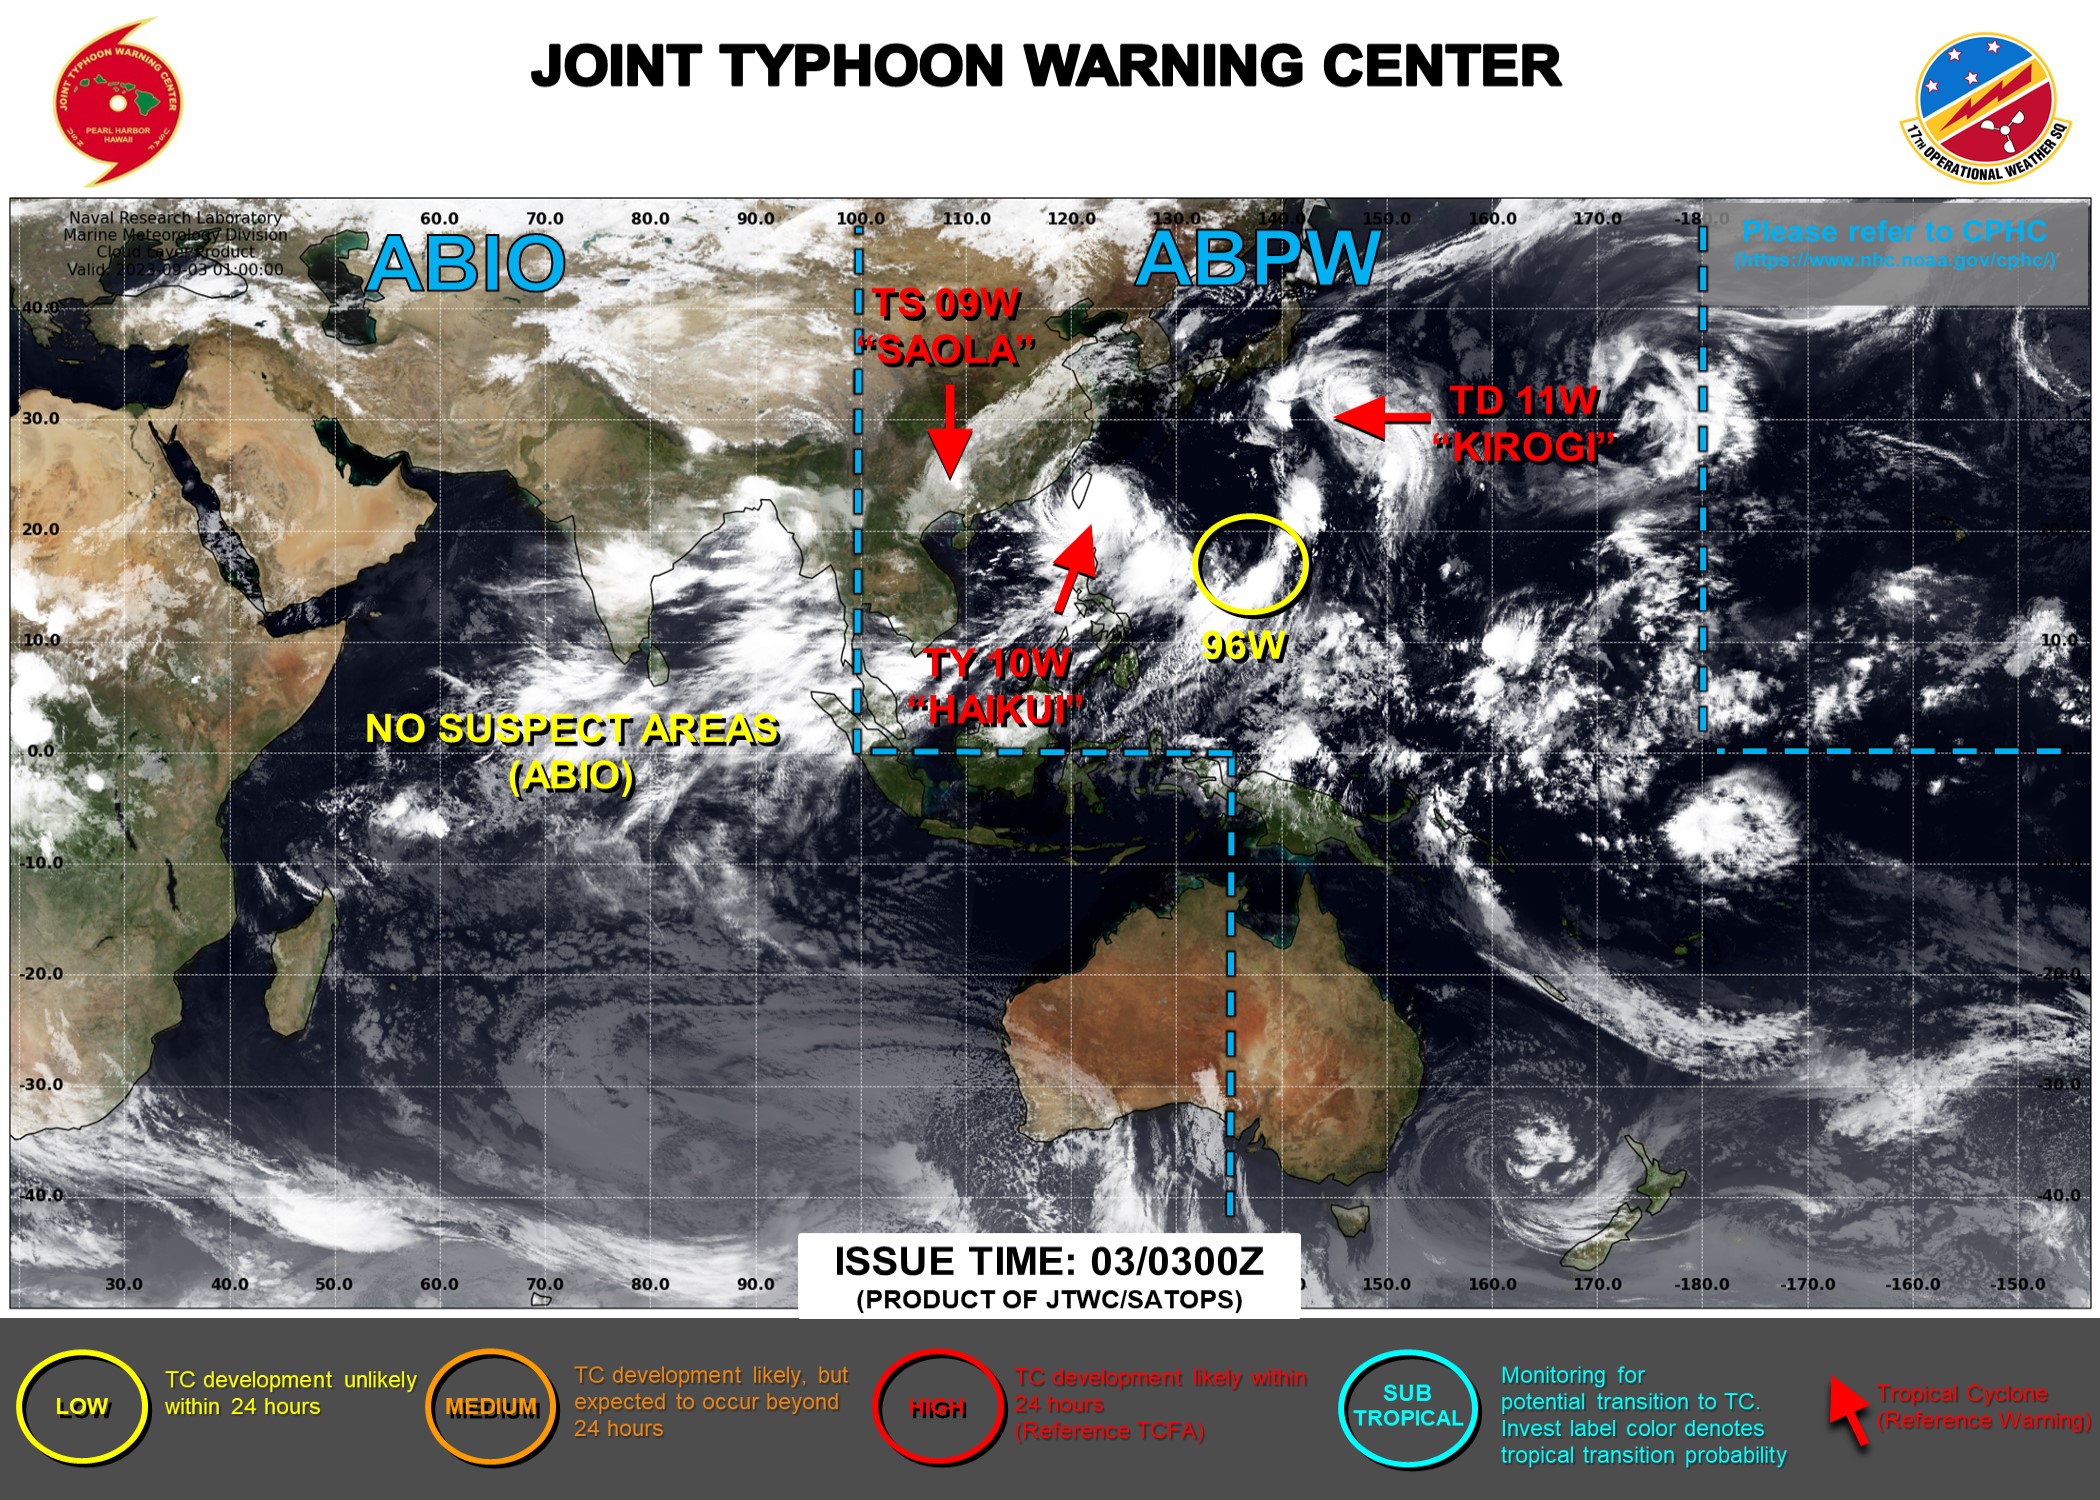 JTWC IS ISSUING 6HOURLY WARNINGS ON 09W(SAOLA)AND 10W(HAIKUI). FINAL WARNING ON 11W(KIROGI) WAS ISSUED AT 03/03UTC.  3HOURLY SATELLITE BULLETINS ARE ISSUED ON 09W,10W AND 11W.